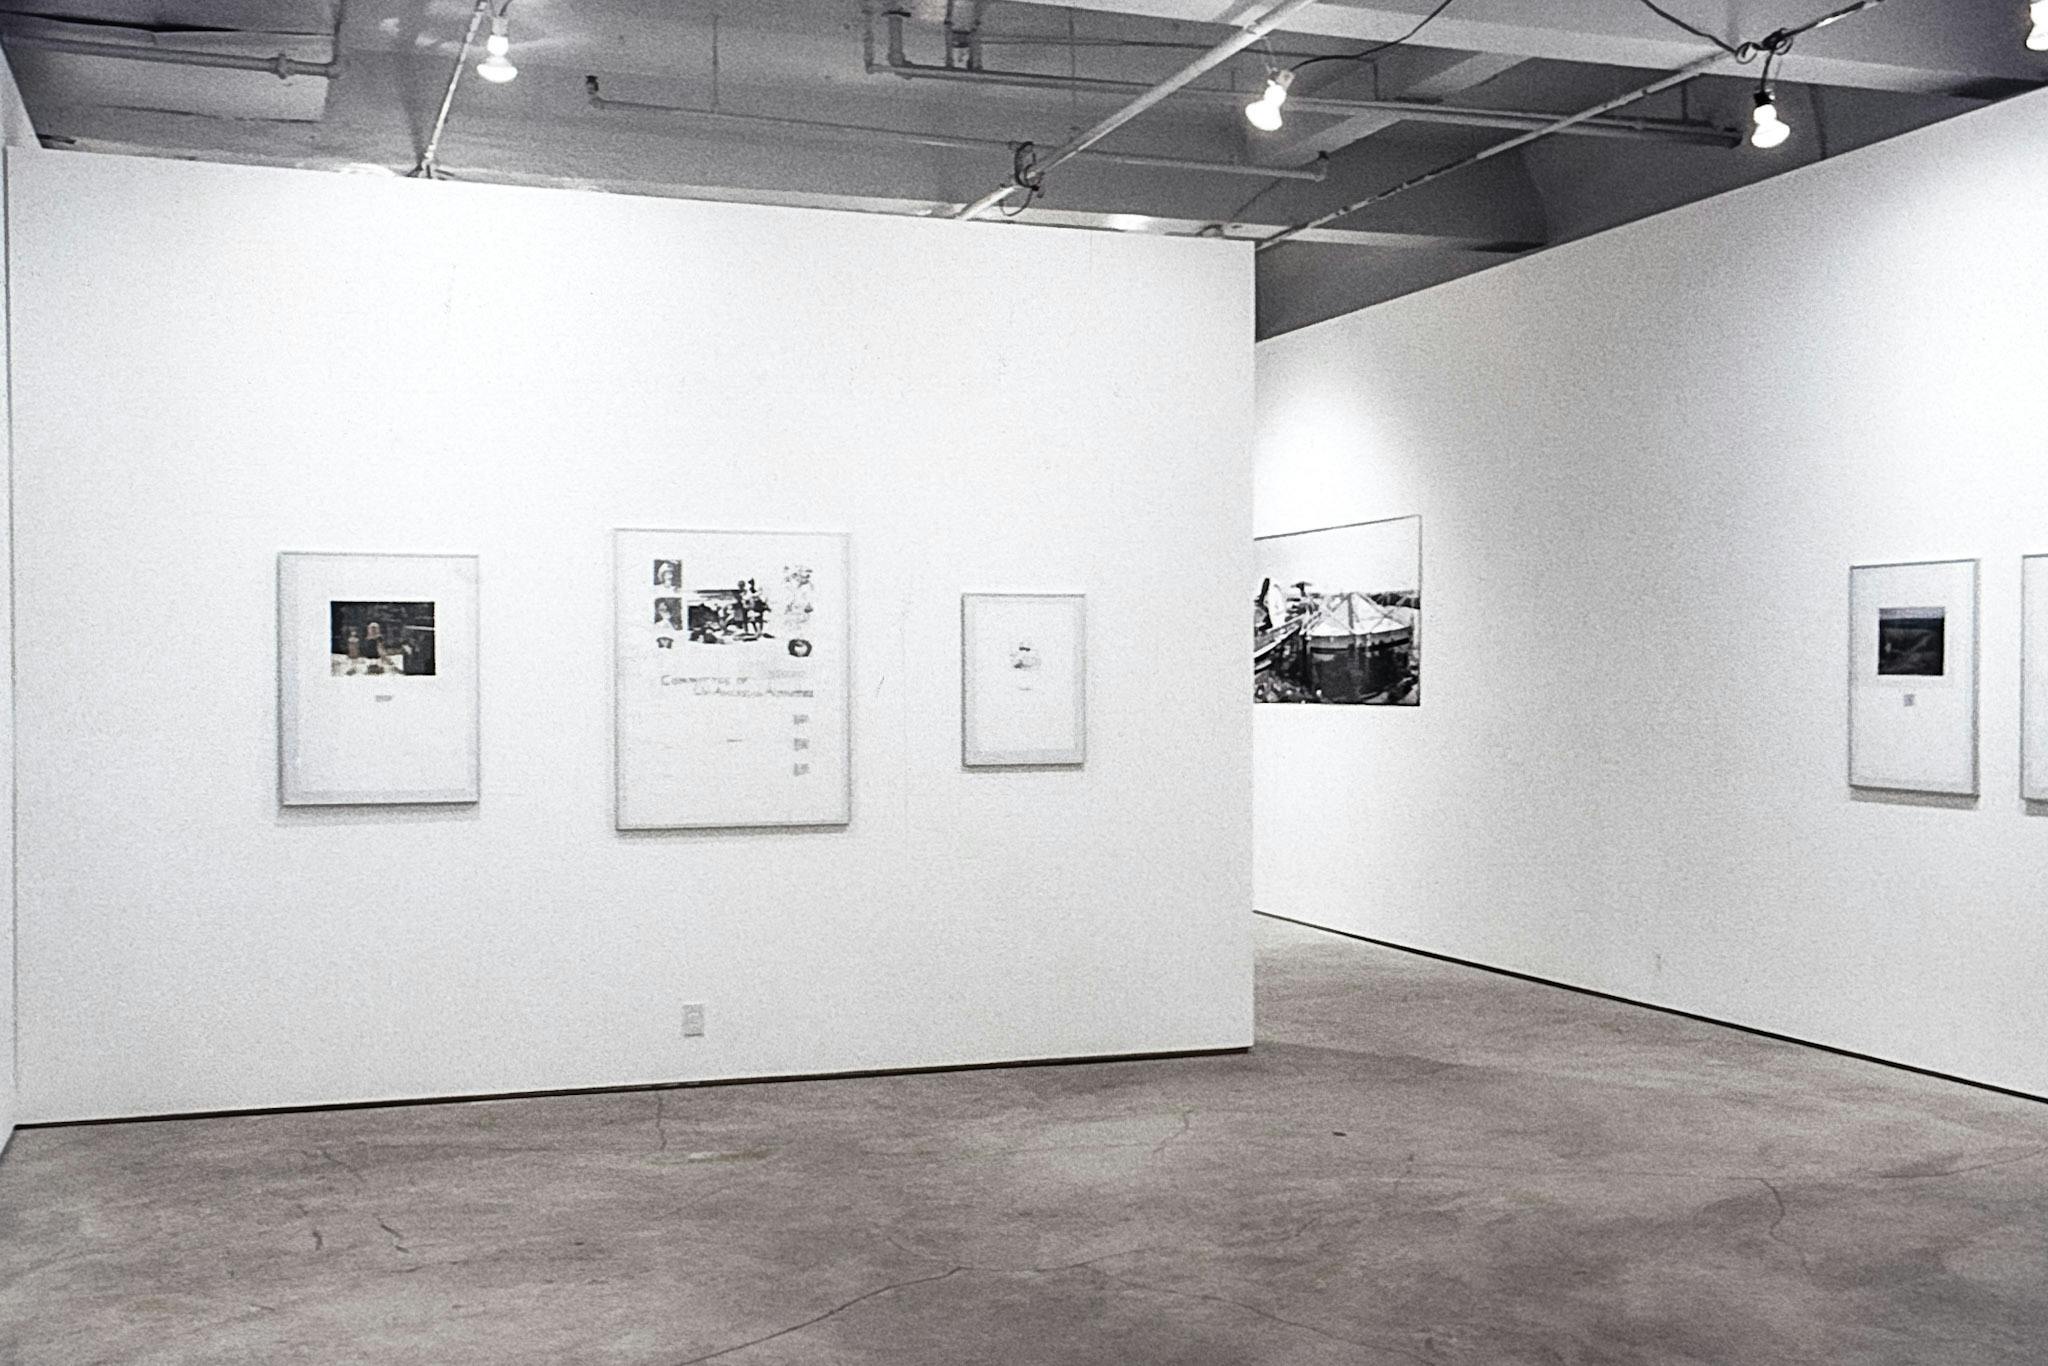 Different-sized illustrations and collages are in metal frames mounted on the white walls.